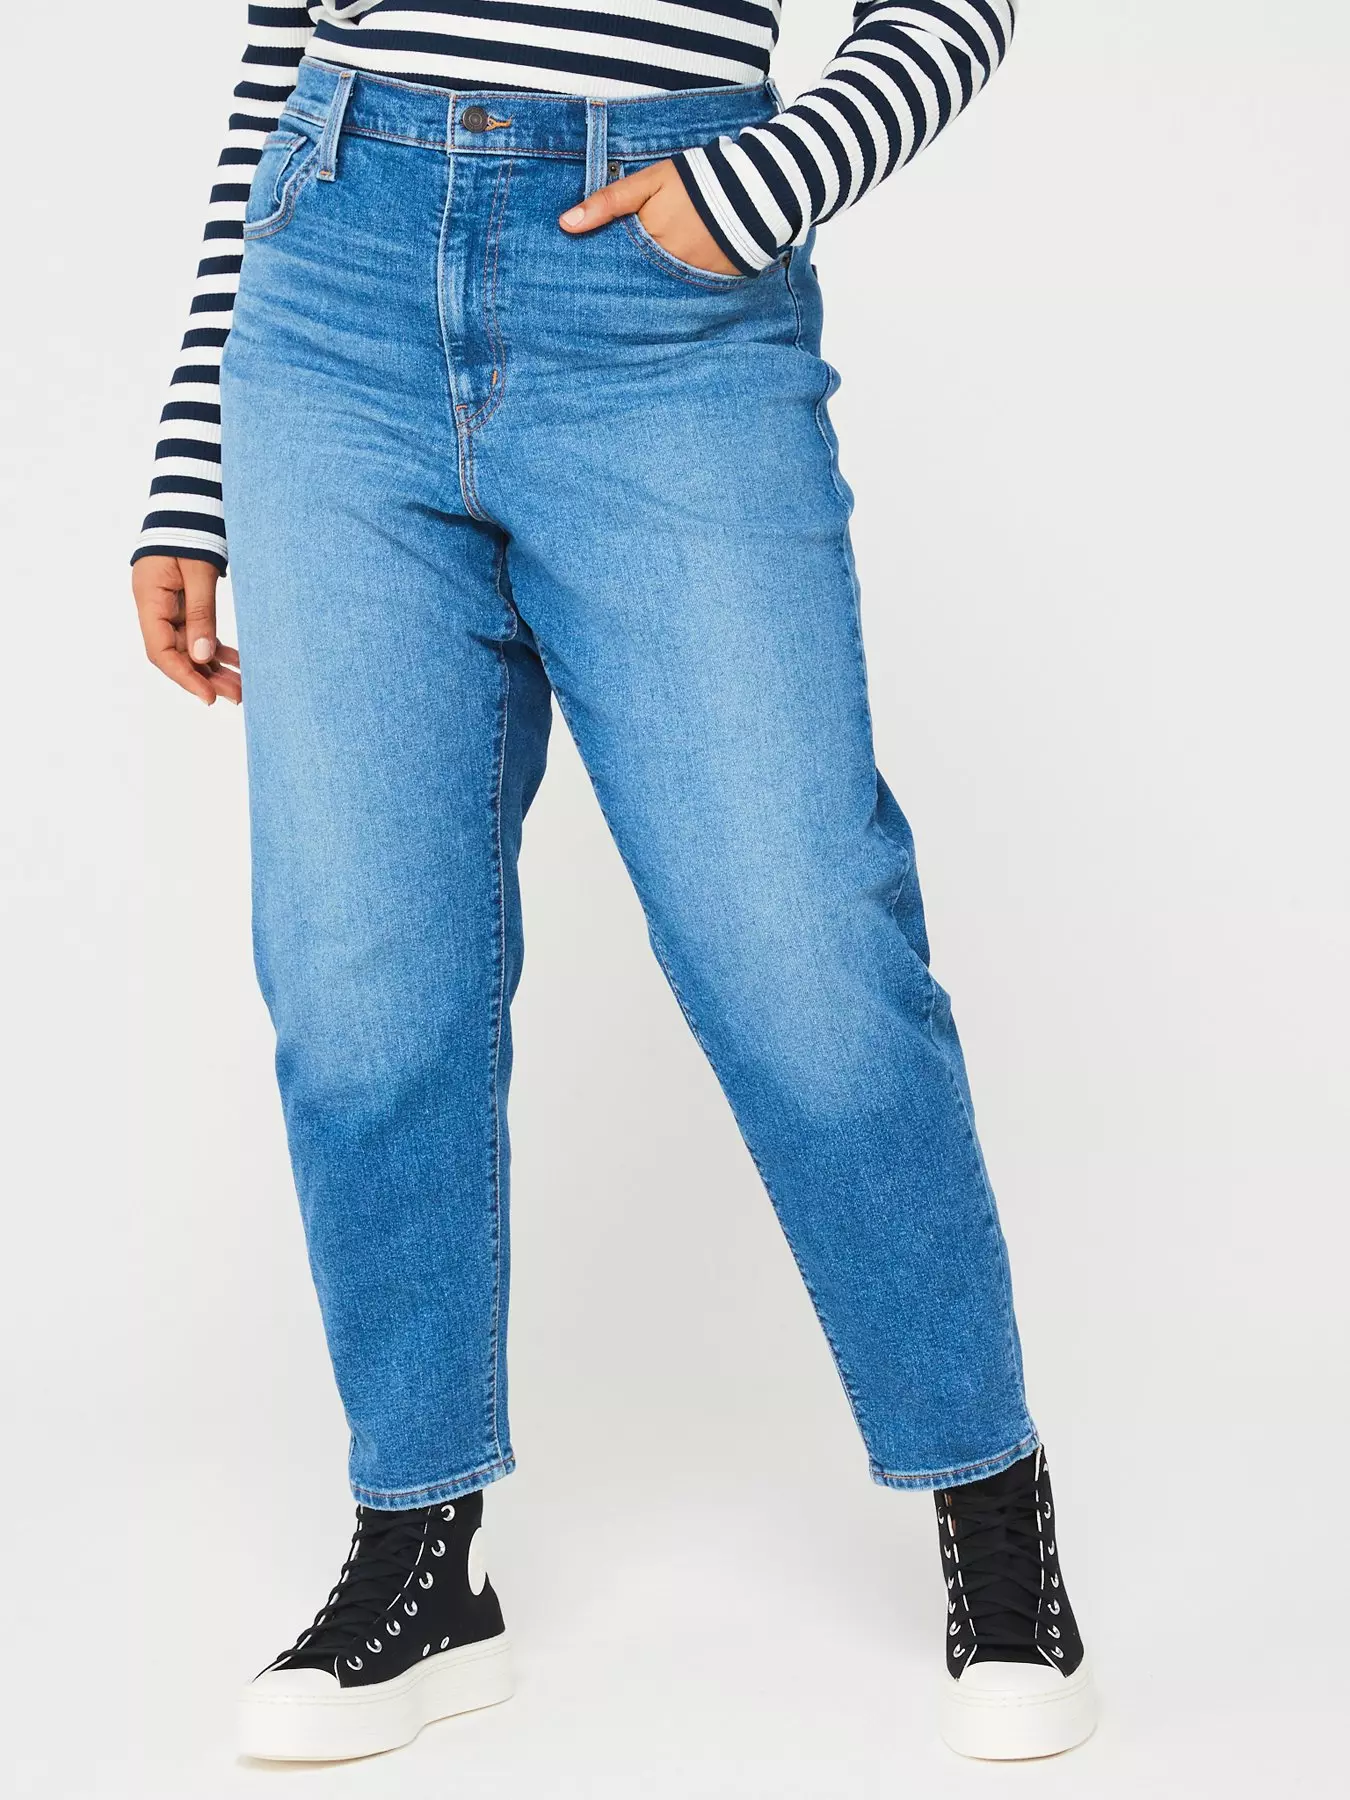 HAPPENING Plus Size Women Pure Denim -Baggy/Loose Fit Jeans- HIGH Rise -Non  Stretch - Faded Denim Blue Color - Waist Size 36 to 54 inches